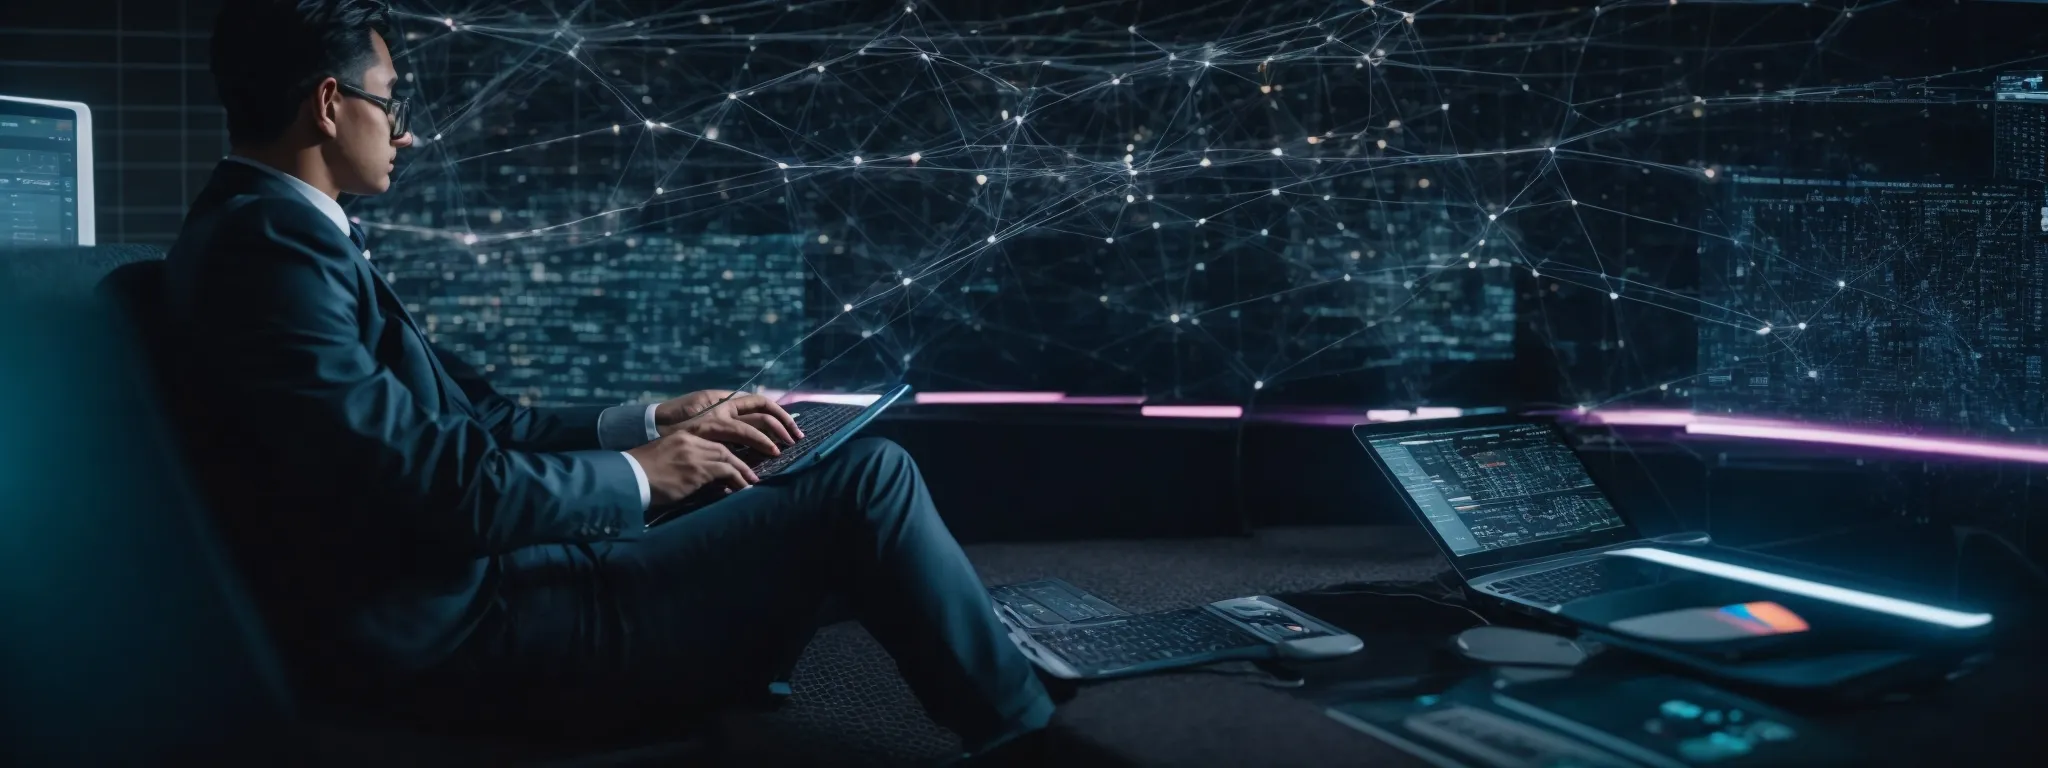 a professional hovering over a laptop with complex analytics on screen amidst a web of interconnected data points.